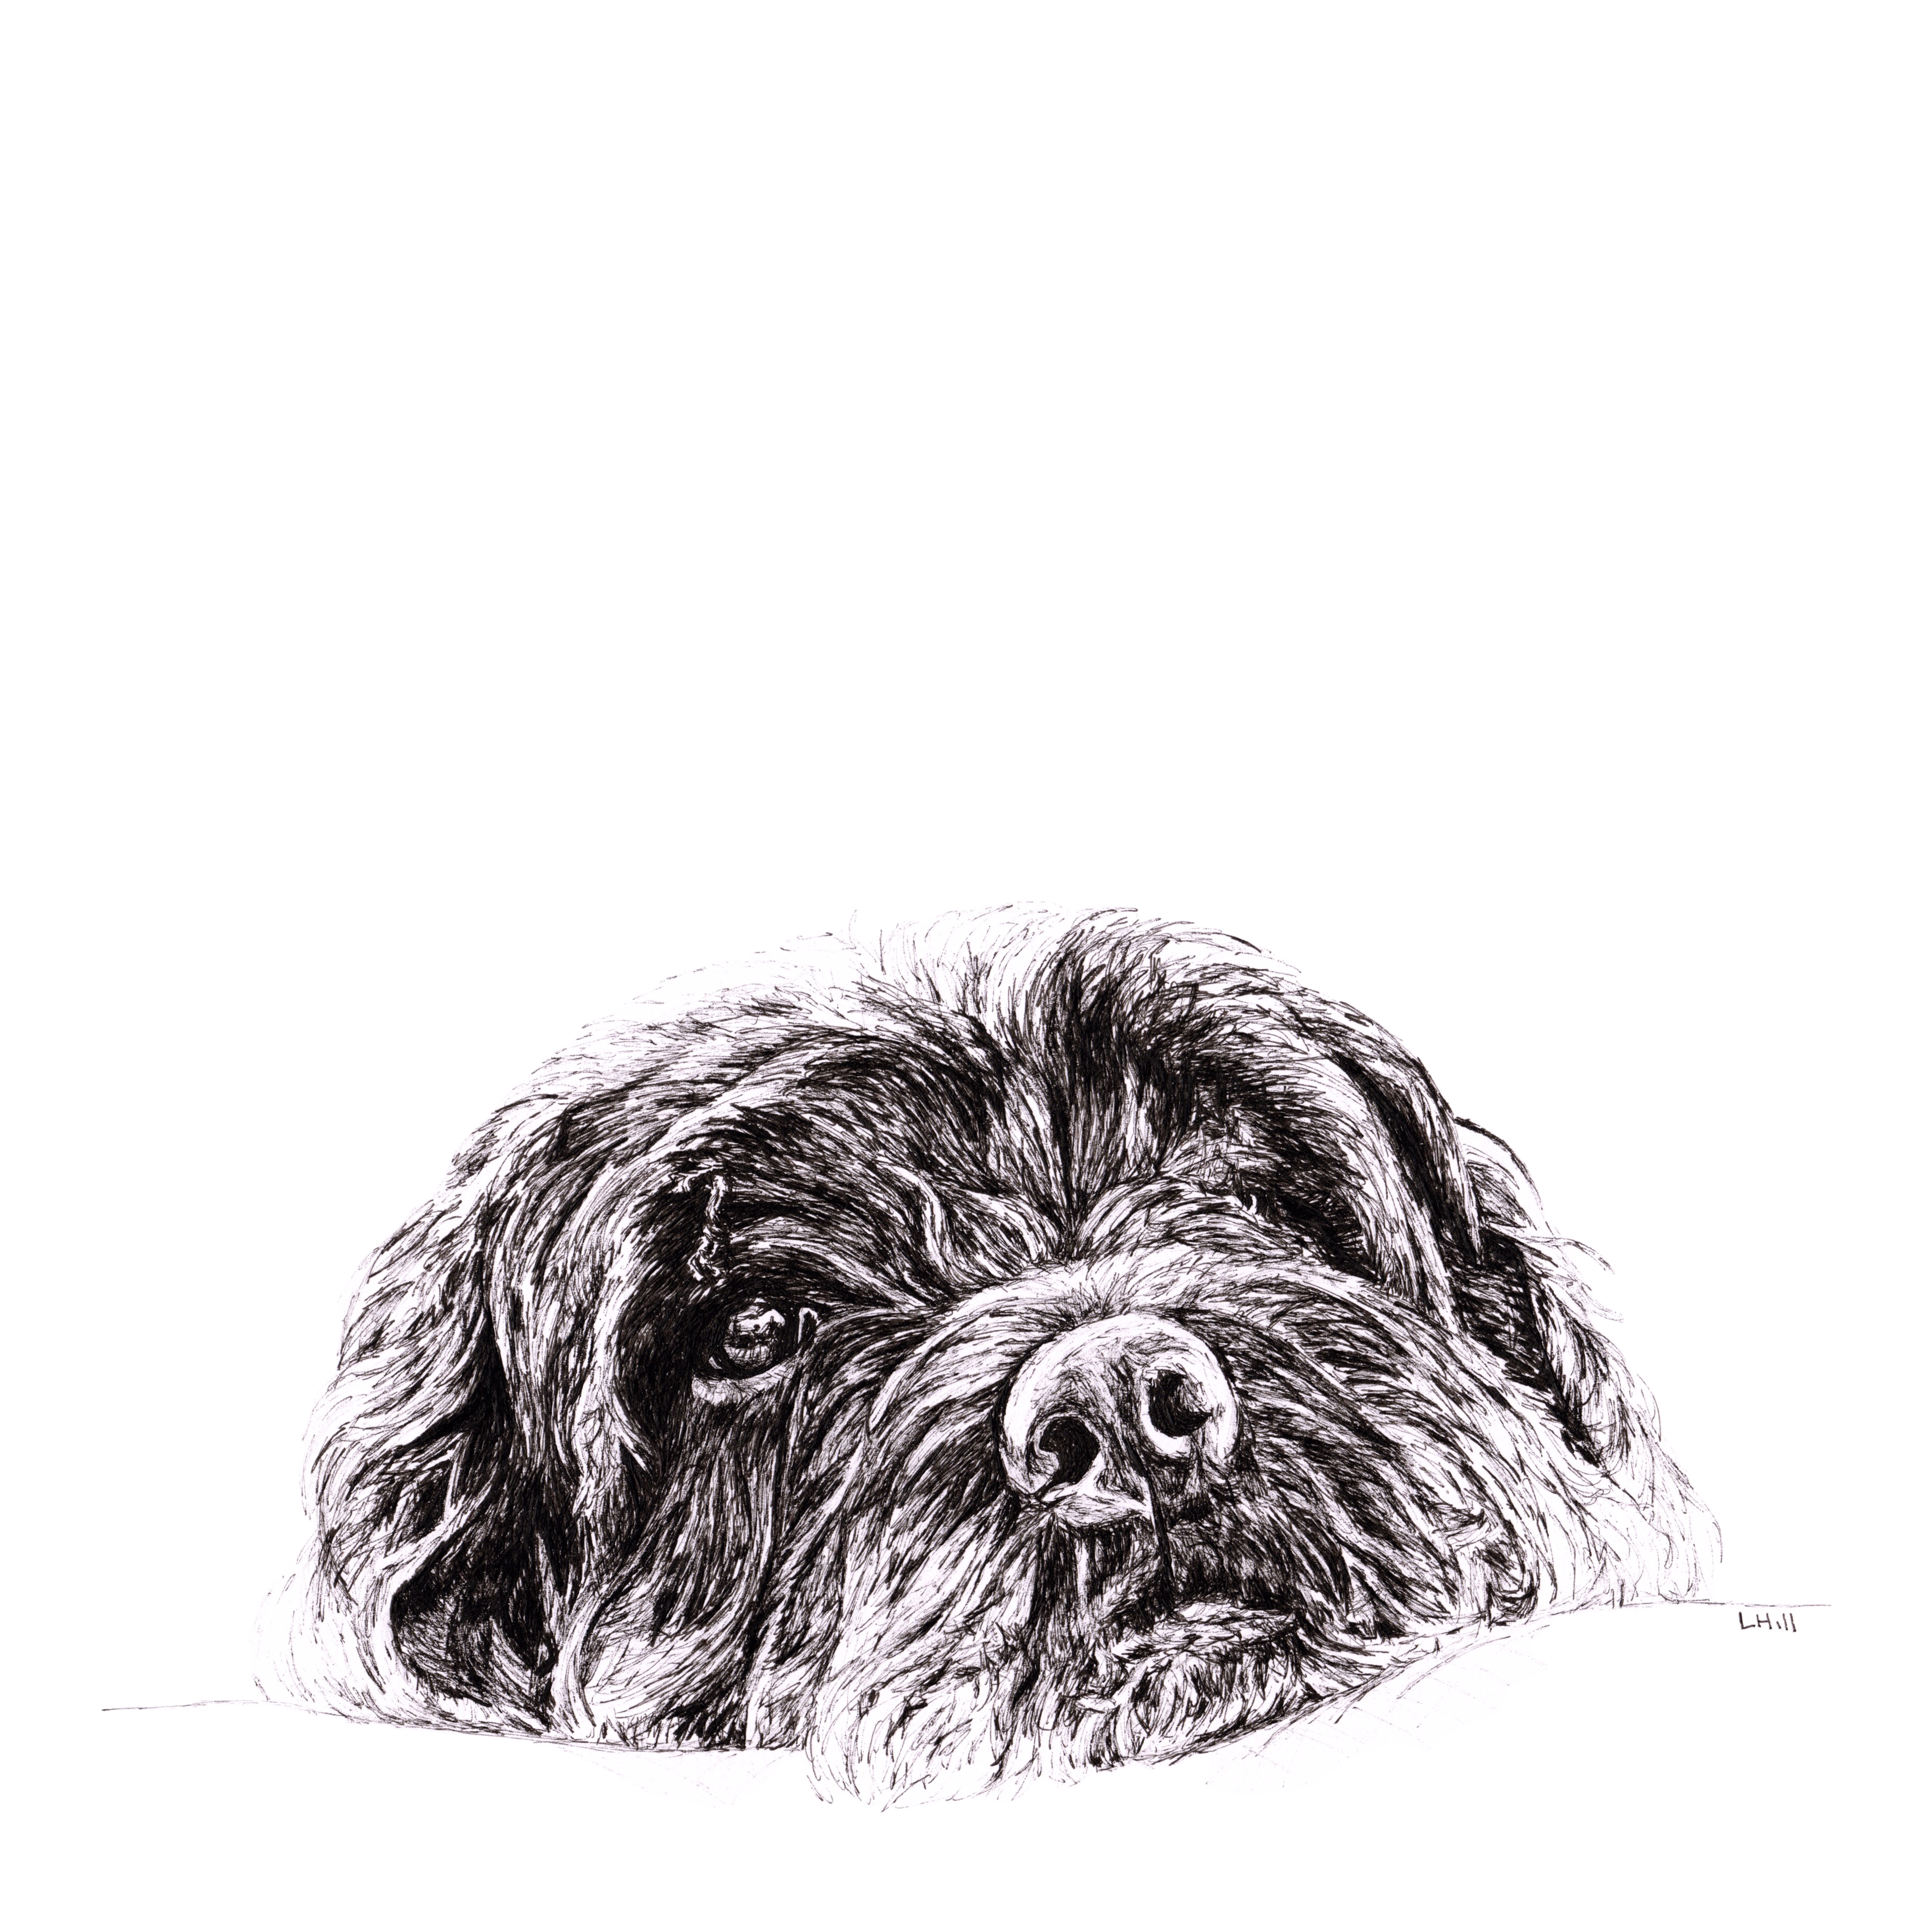 Lazy dog pen and ink illustration by Louisa Hill